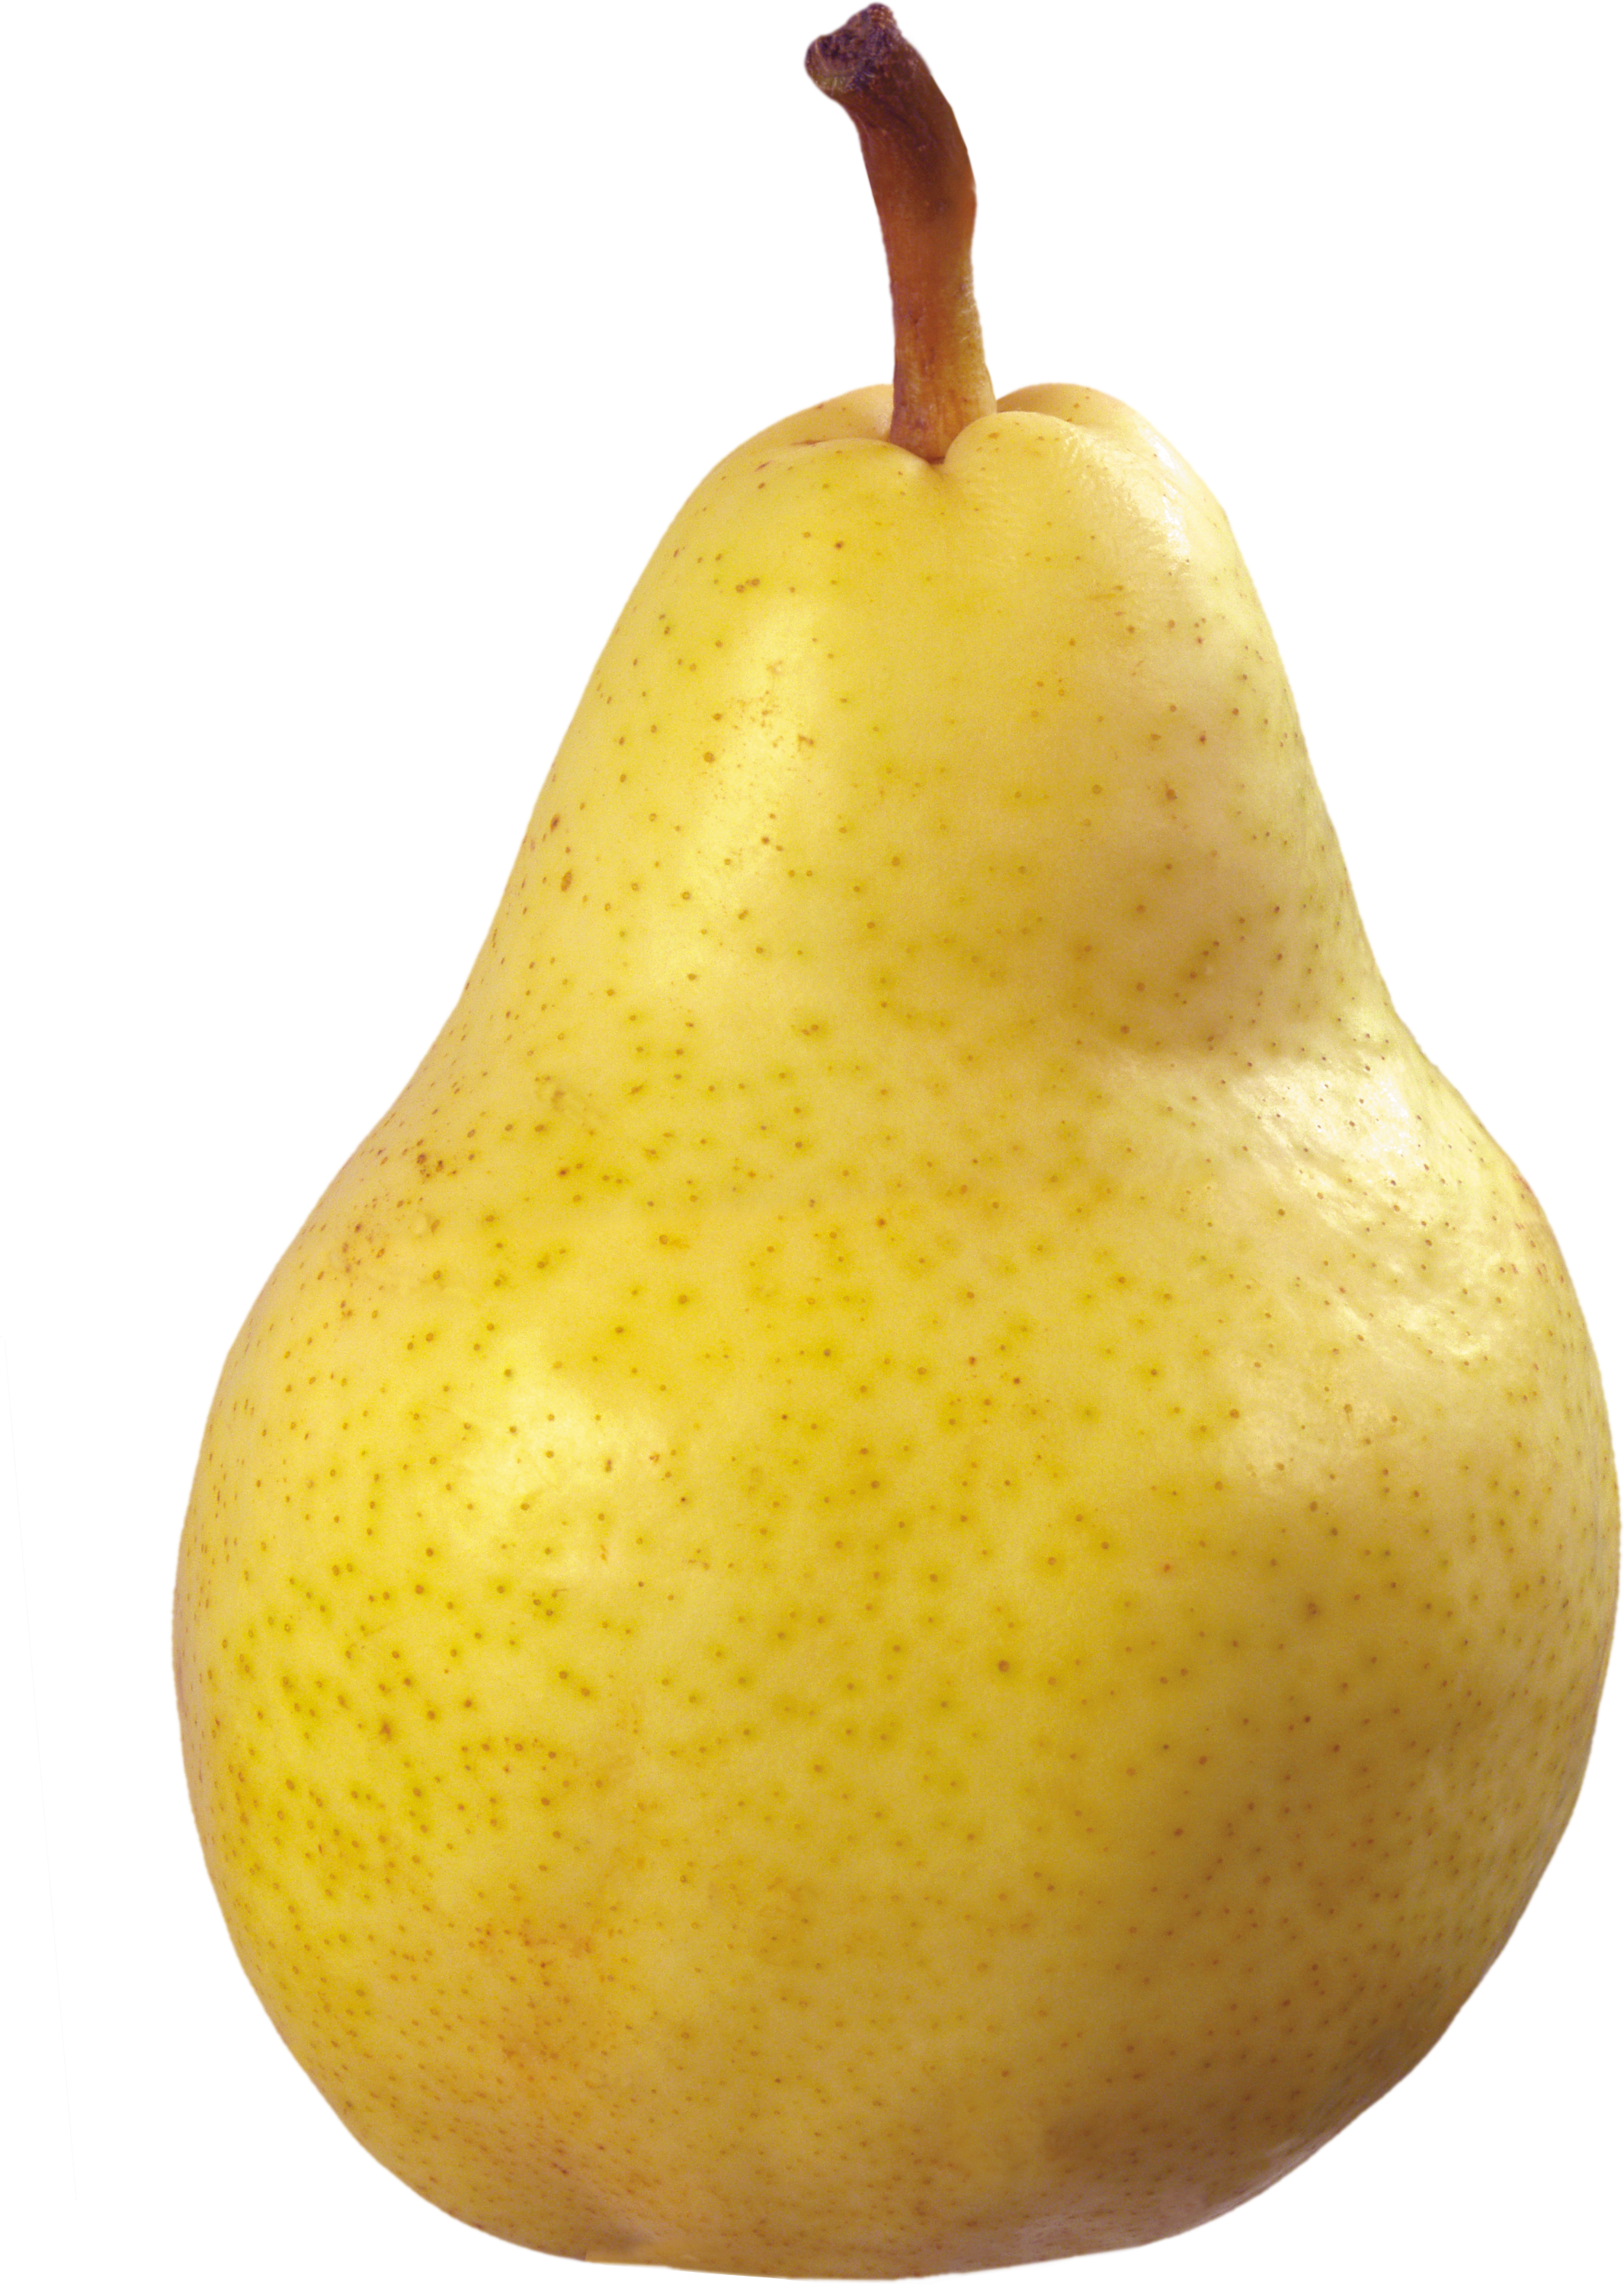 Download PNG image: Yellow pear PNG image. Fruits and vegetables image, Pear, Fruit